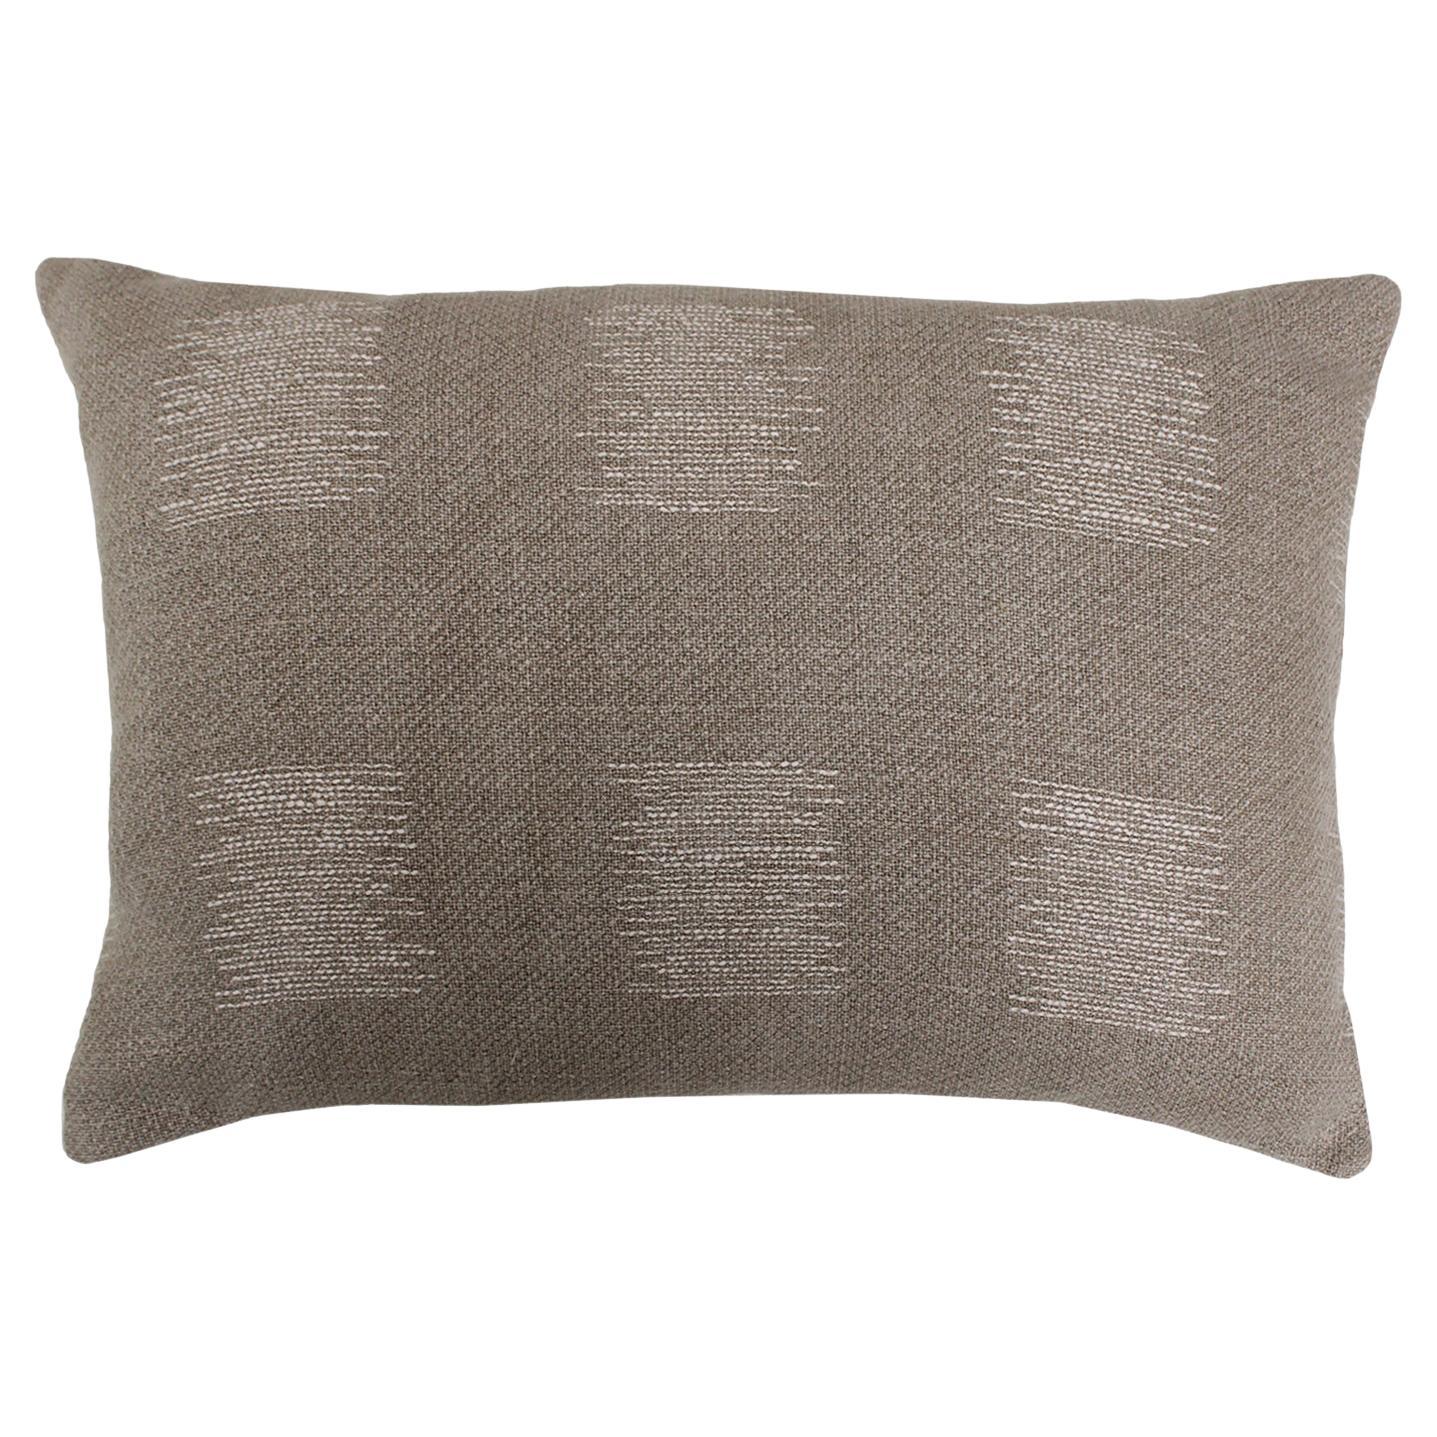 Cushion in Sand Linen with Double Tinsel Trim and Linen White Back For Sale